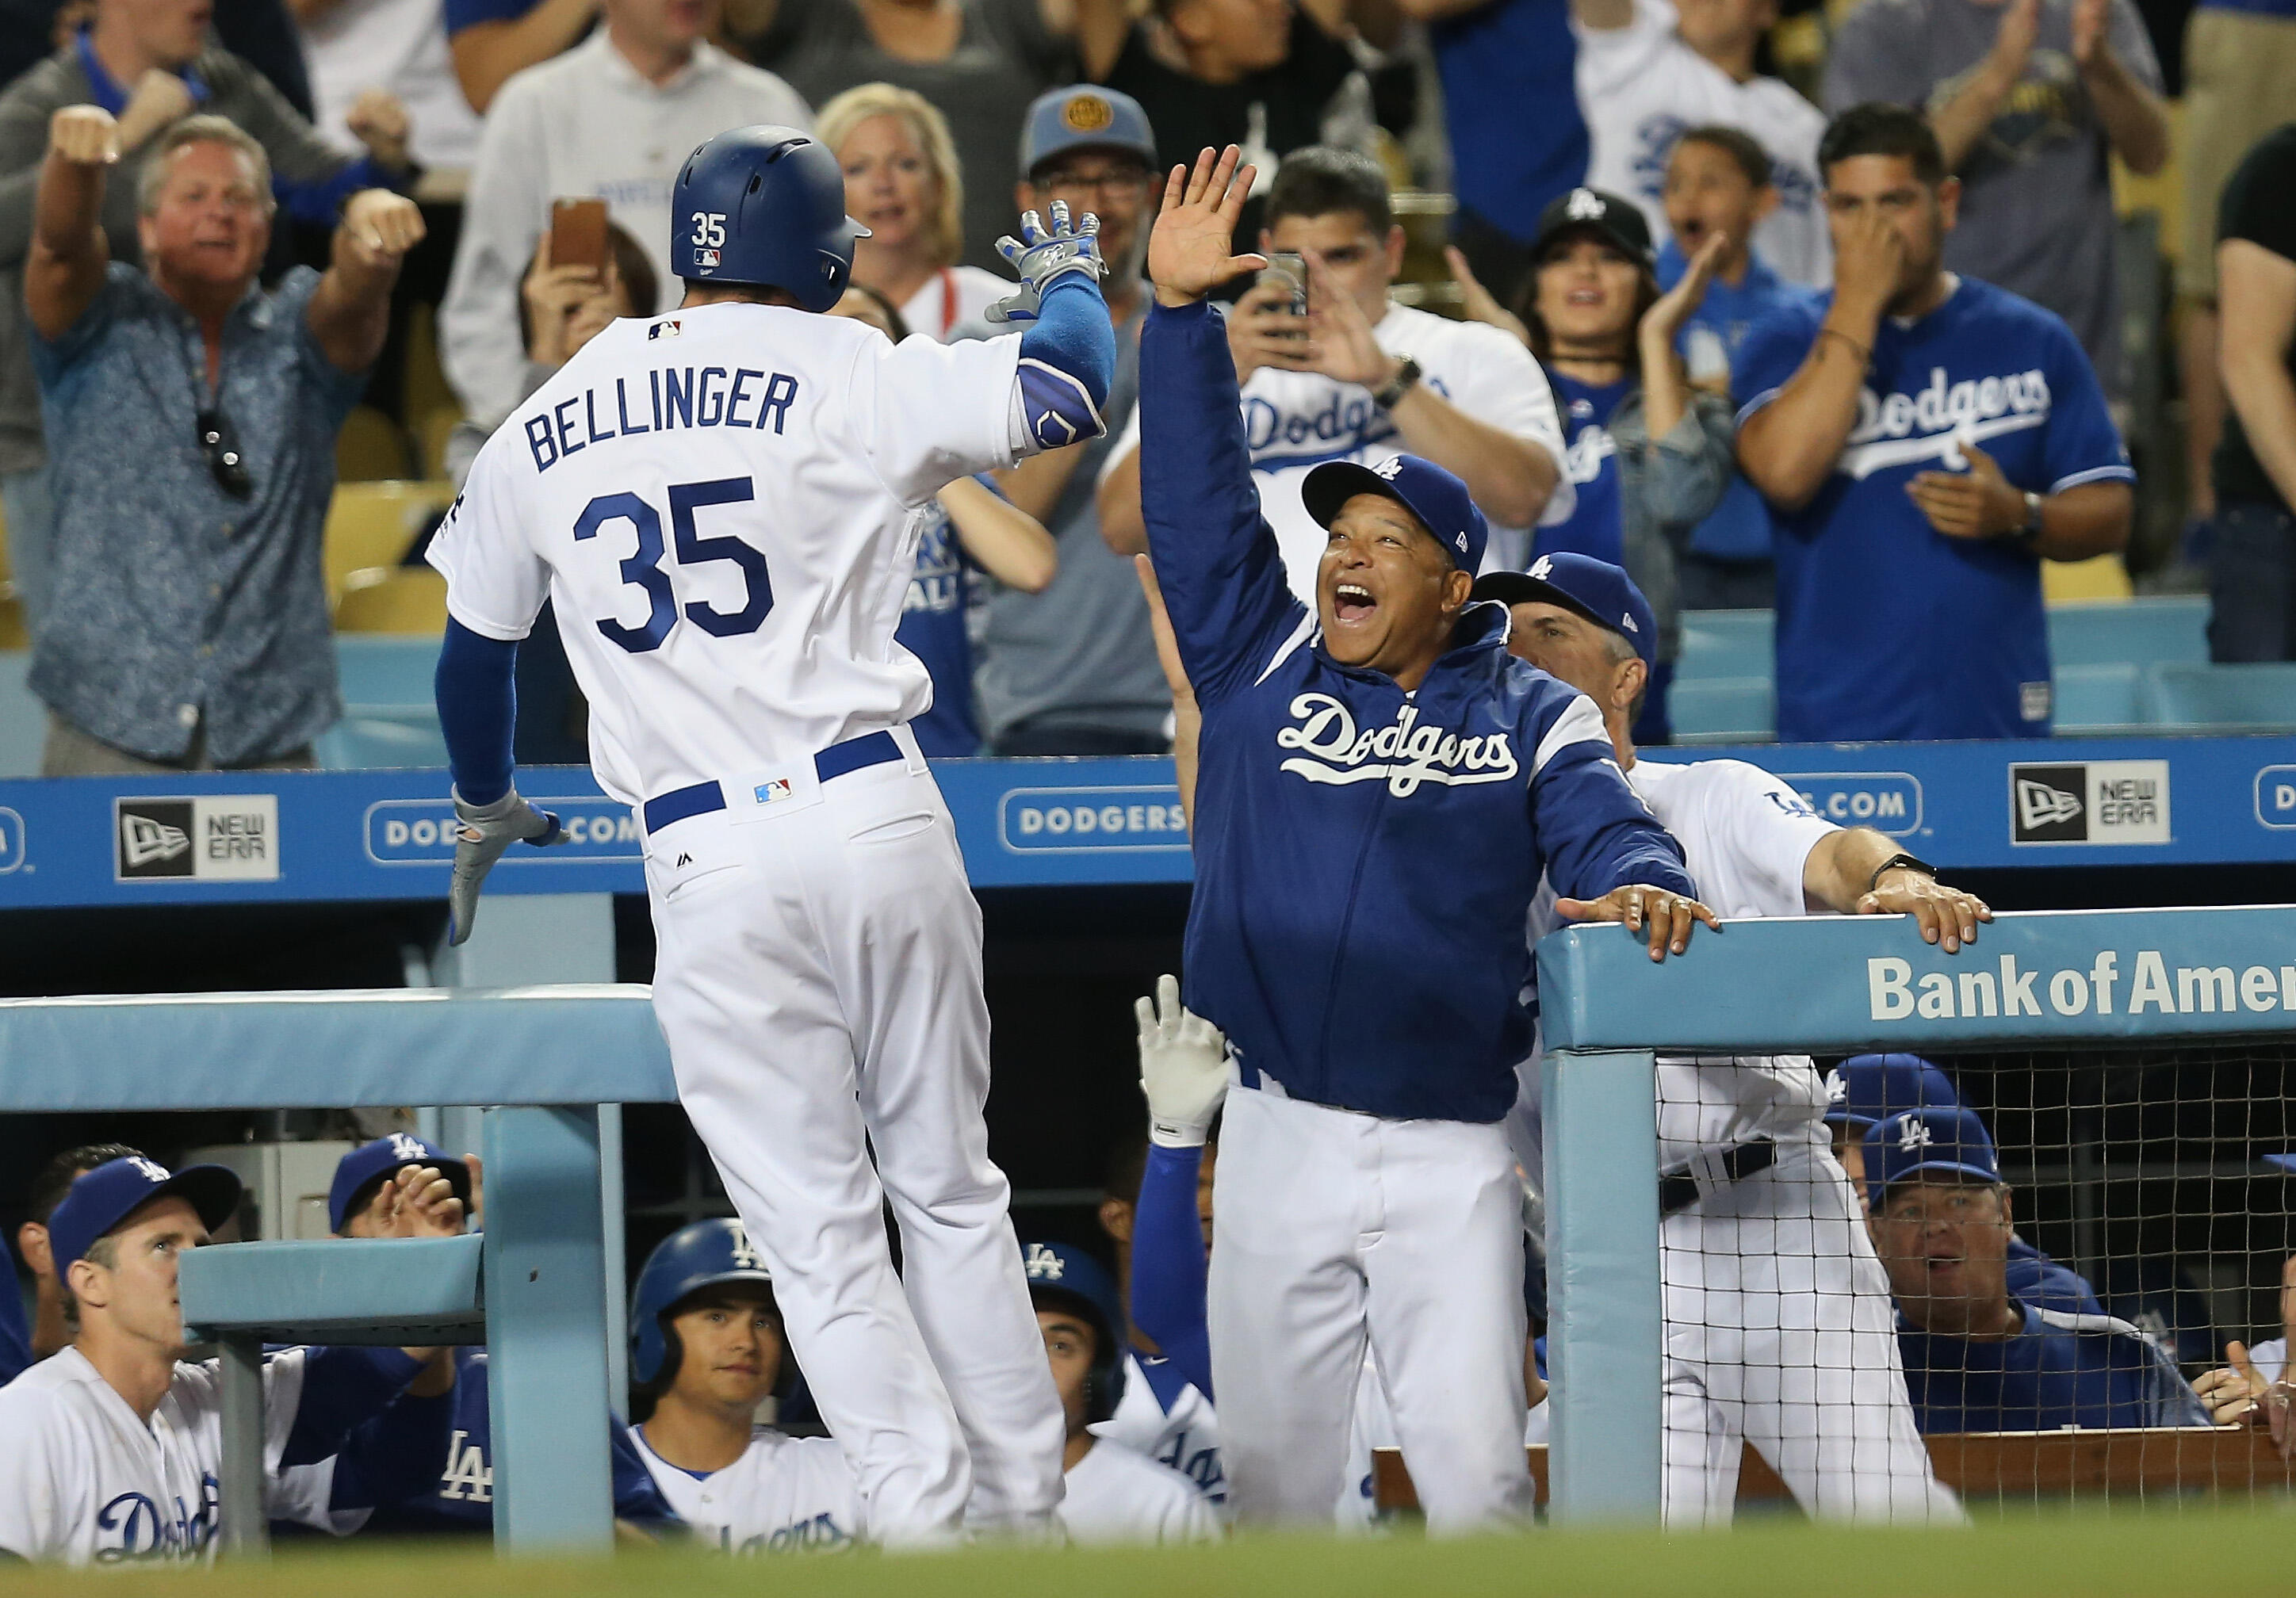 LOS ANGELES, CA - APRIL 29:  Cody Bellinger #35 of the Los Angeles Dodgers is greeted by manager Dave Roberts as he returns to the dugout after hitting a solo home run in the ninth inning against the Philadelphia Phillies at Dodger Stadium on April 29, 20